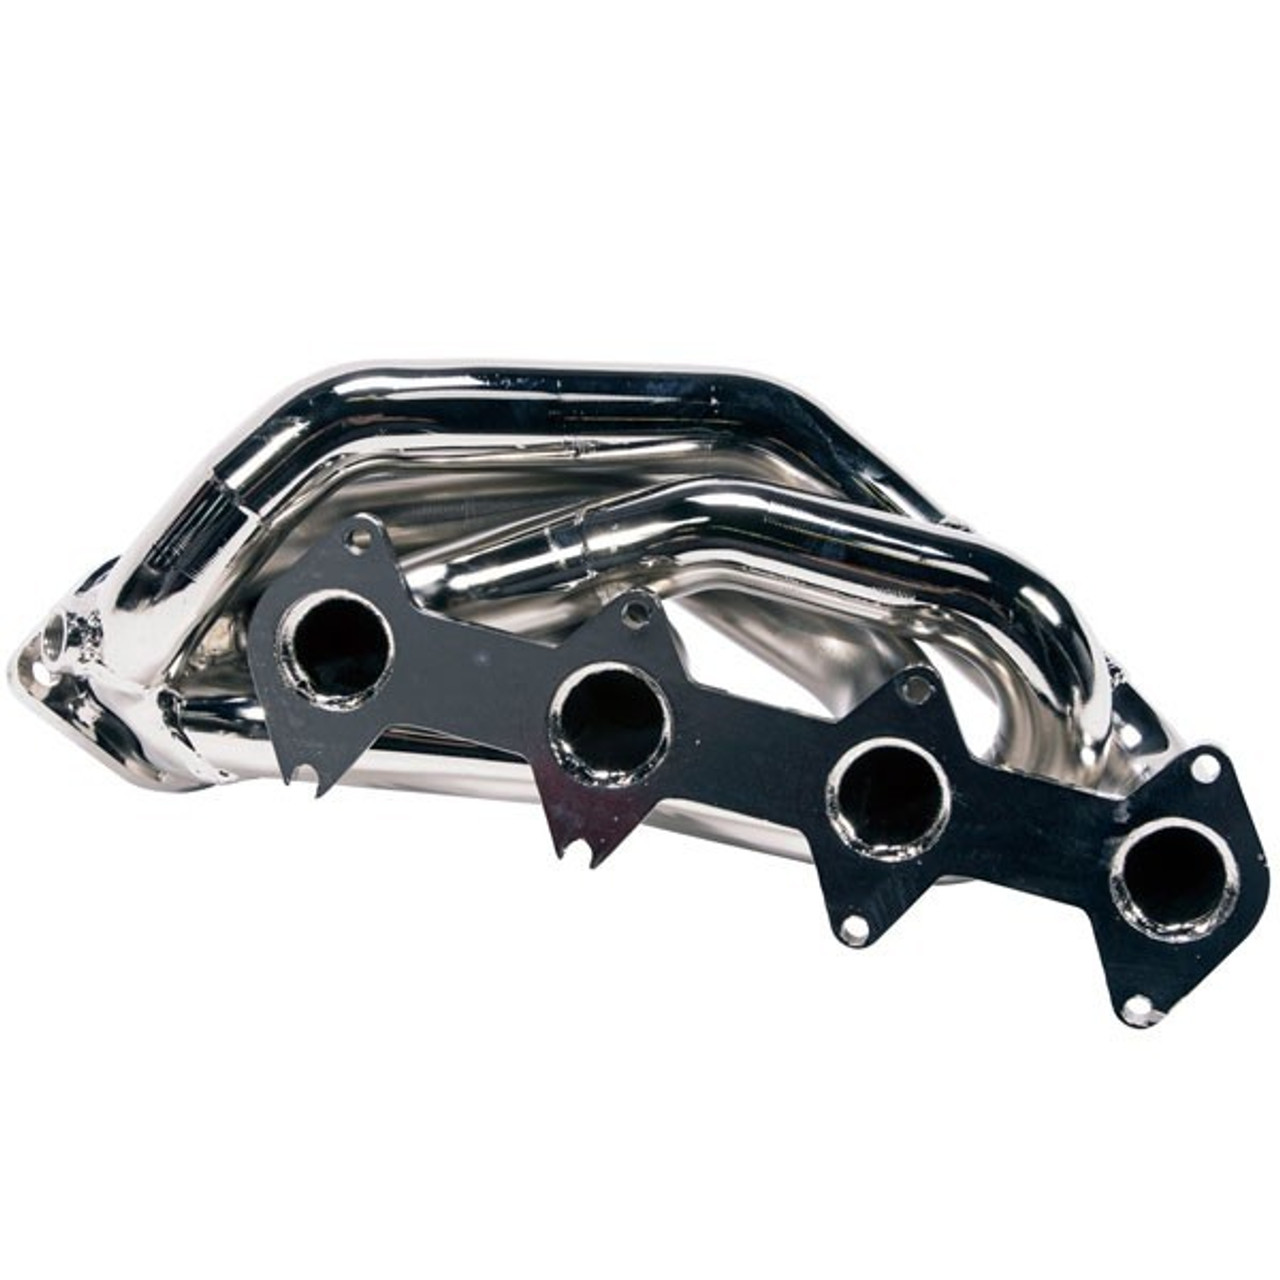 BBK 1612 Mustang 4.6L GT Shorty Tuned Length Chrome 1-5/8 Exhaust Headers (2005-10)